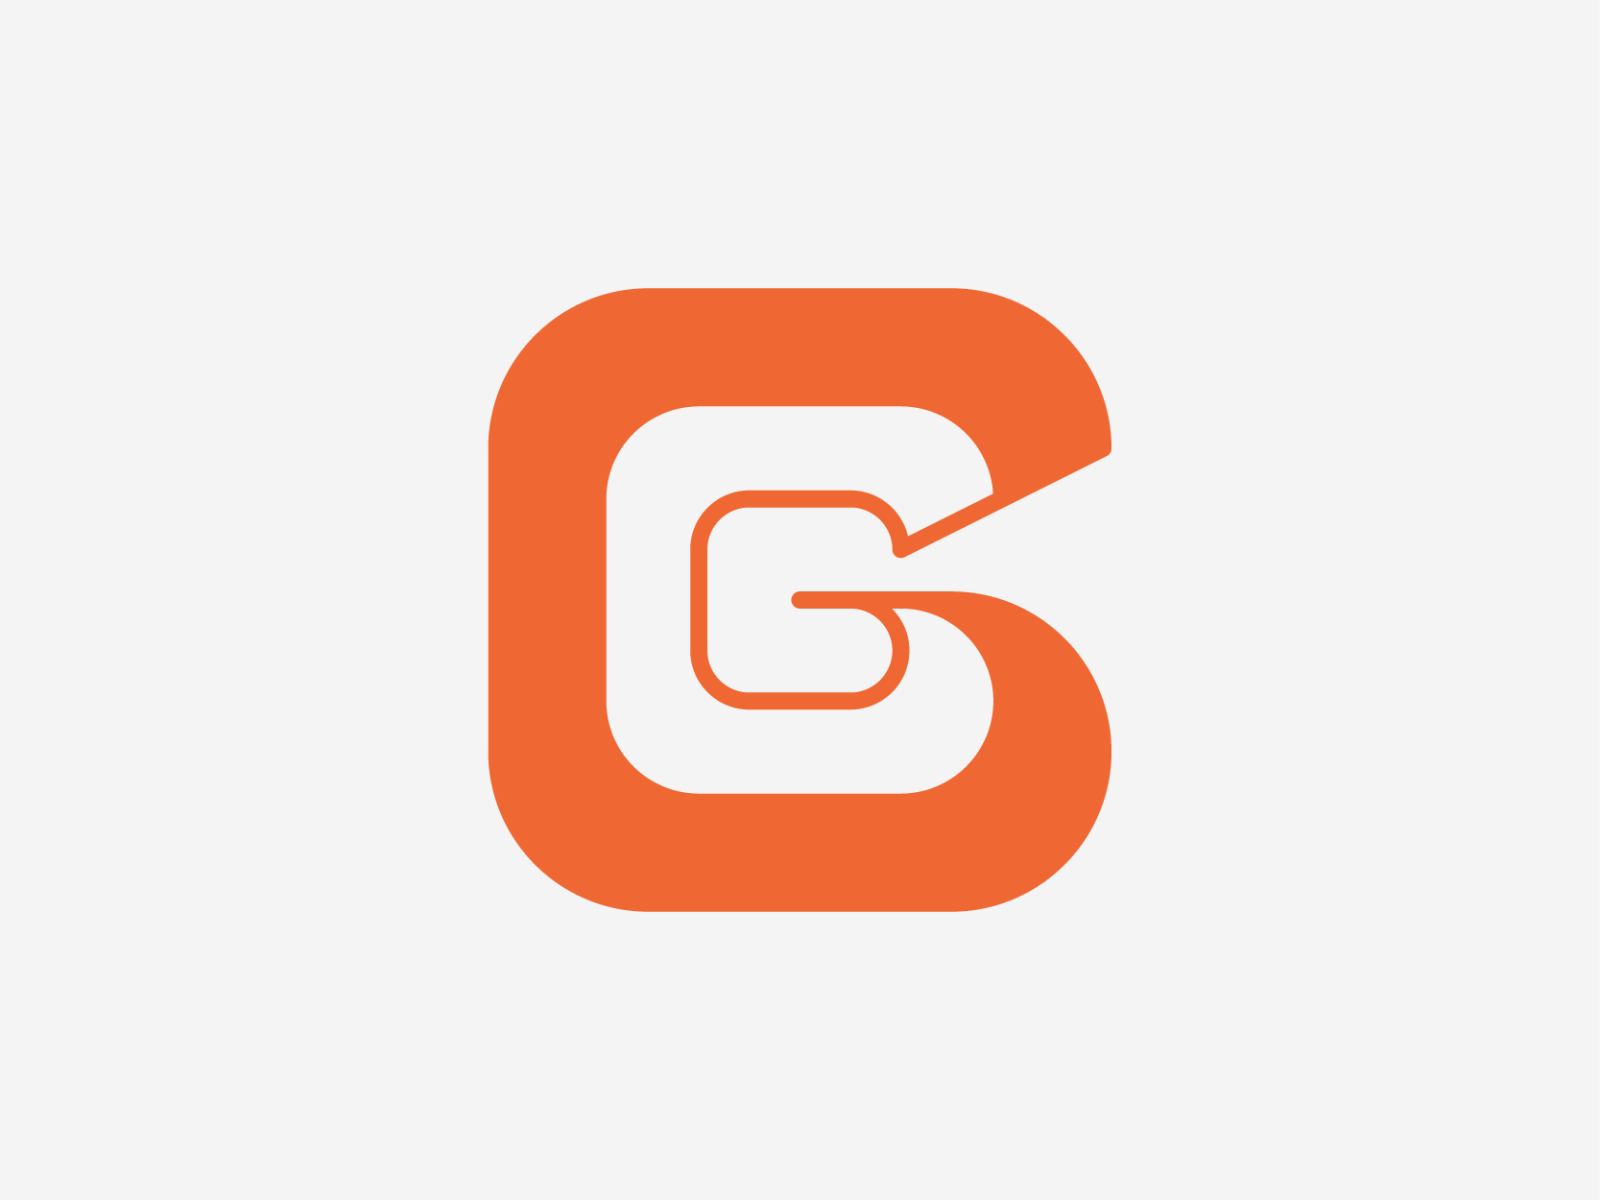 G - Mark by Nour on Dribbble